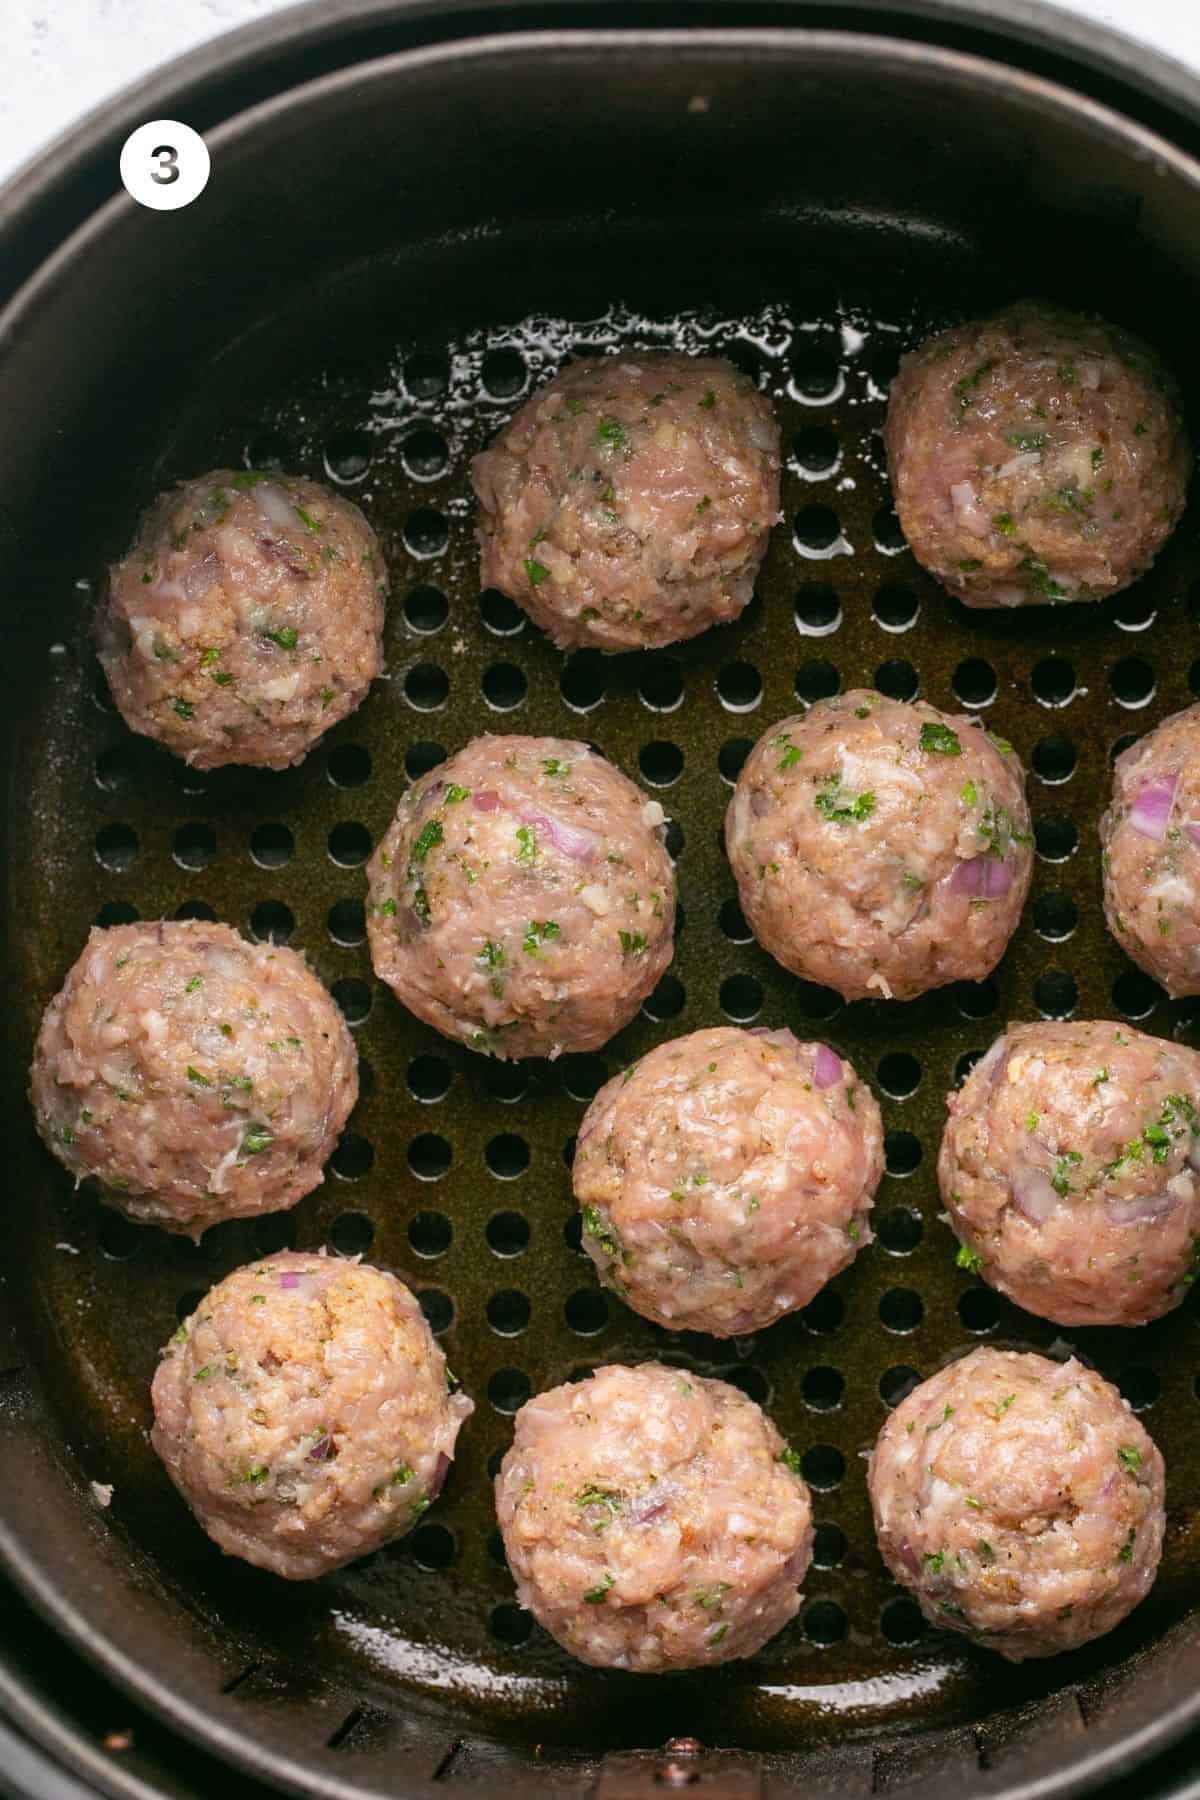 Mixture formed into meatballs and in the air fryer basket. 